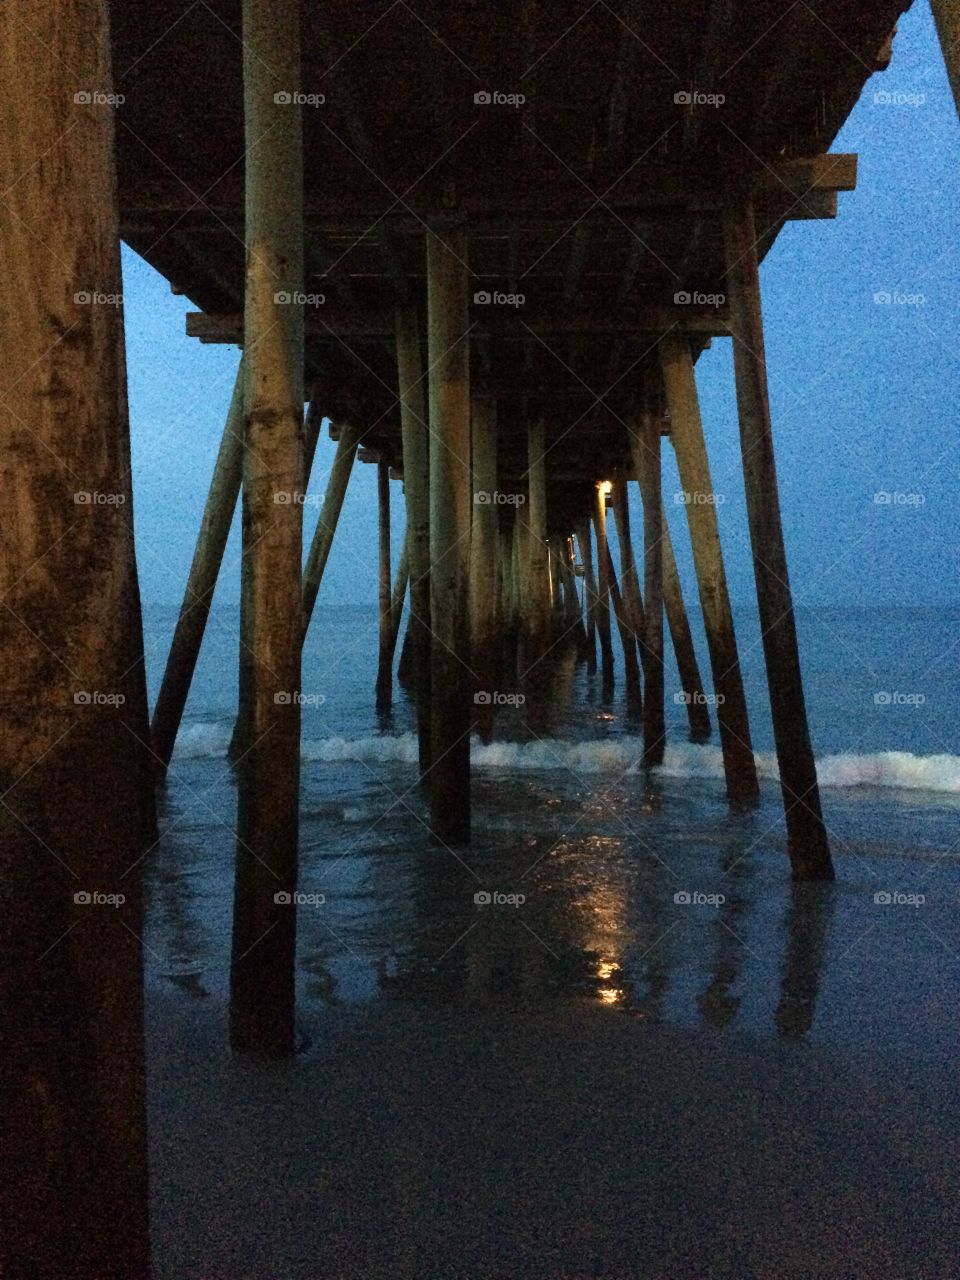 Under the fishing pier